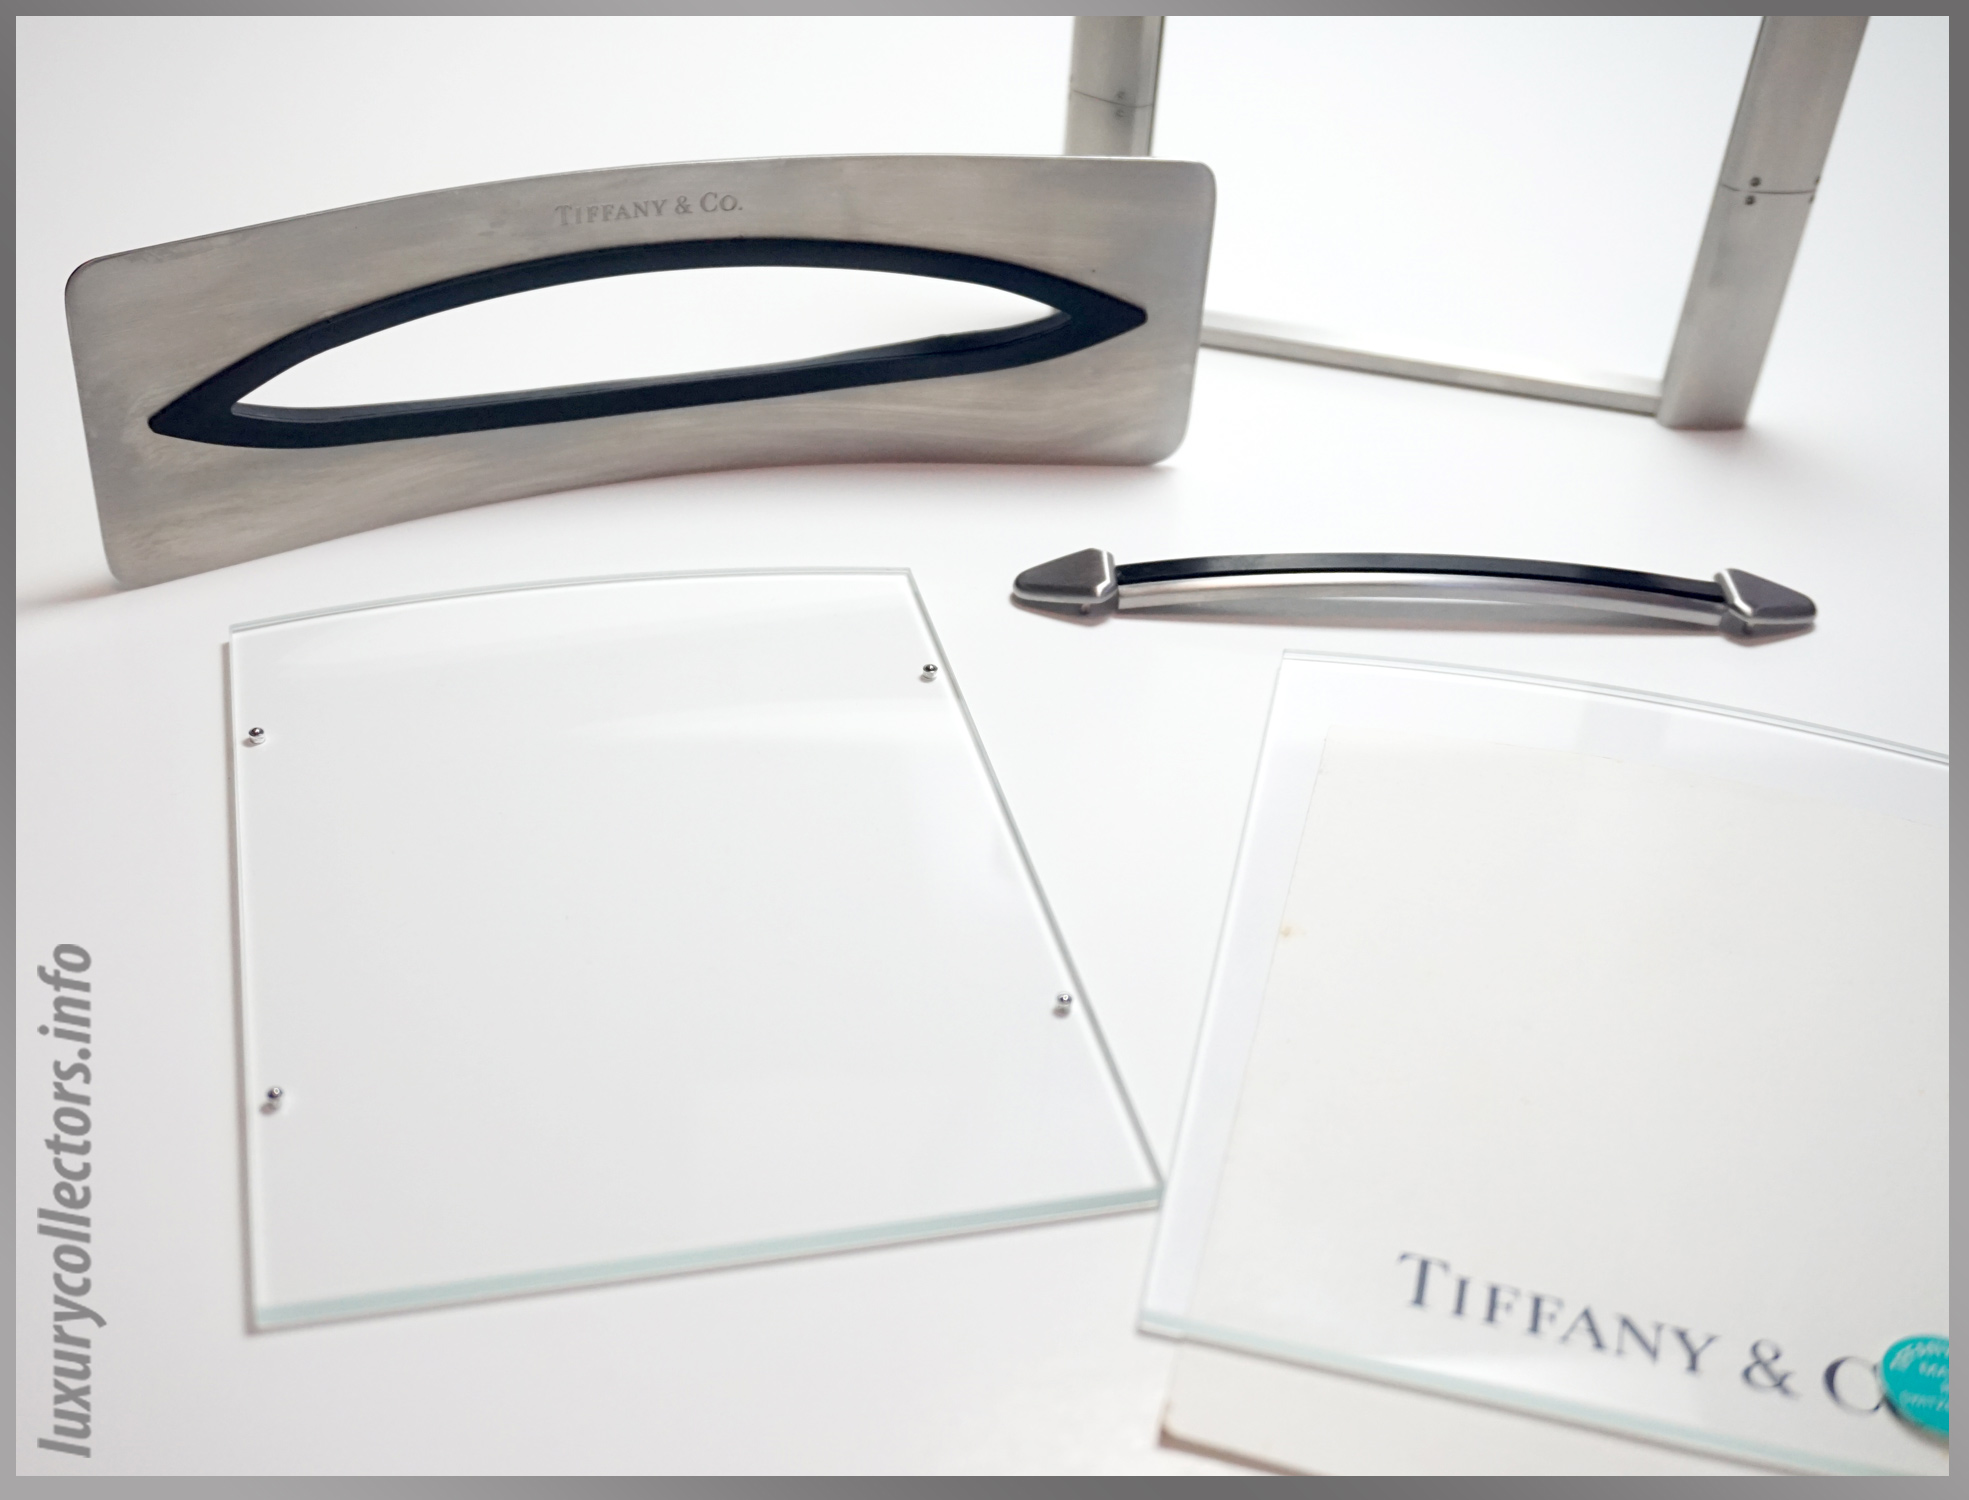 Tiffany & and Co. Streamerica Stainless Steel Airframe Picture Photo Frame Large Swiss Made in Switzerland Detailed logo glass panels